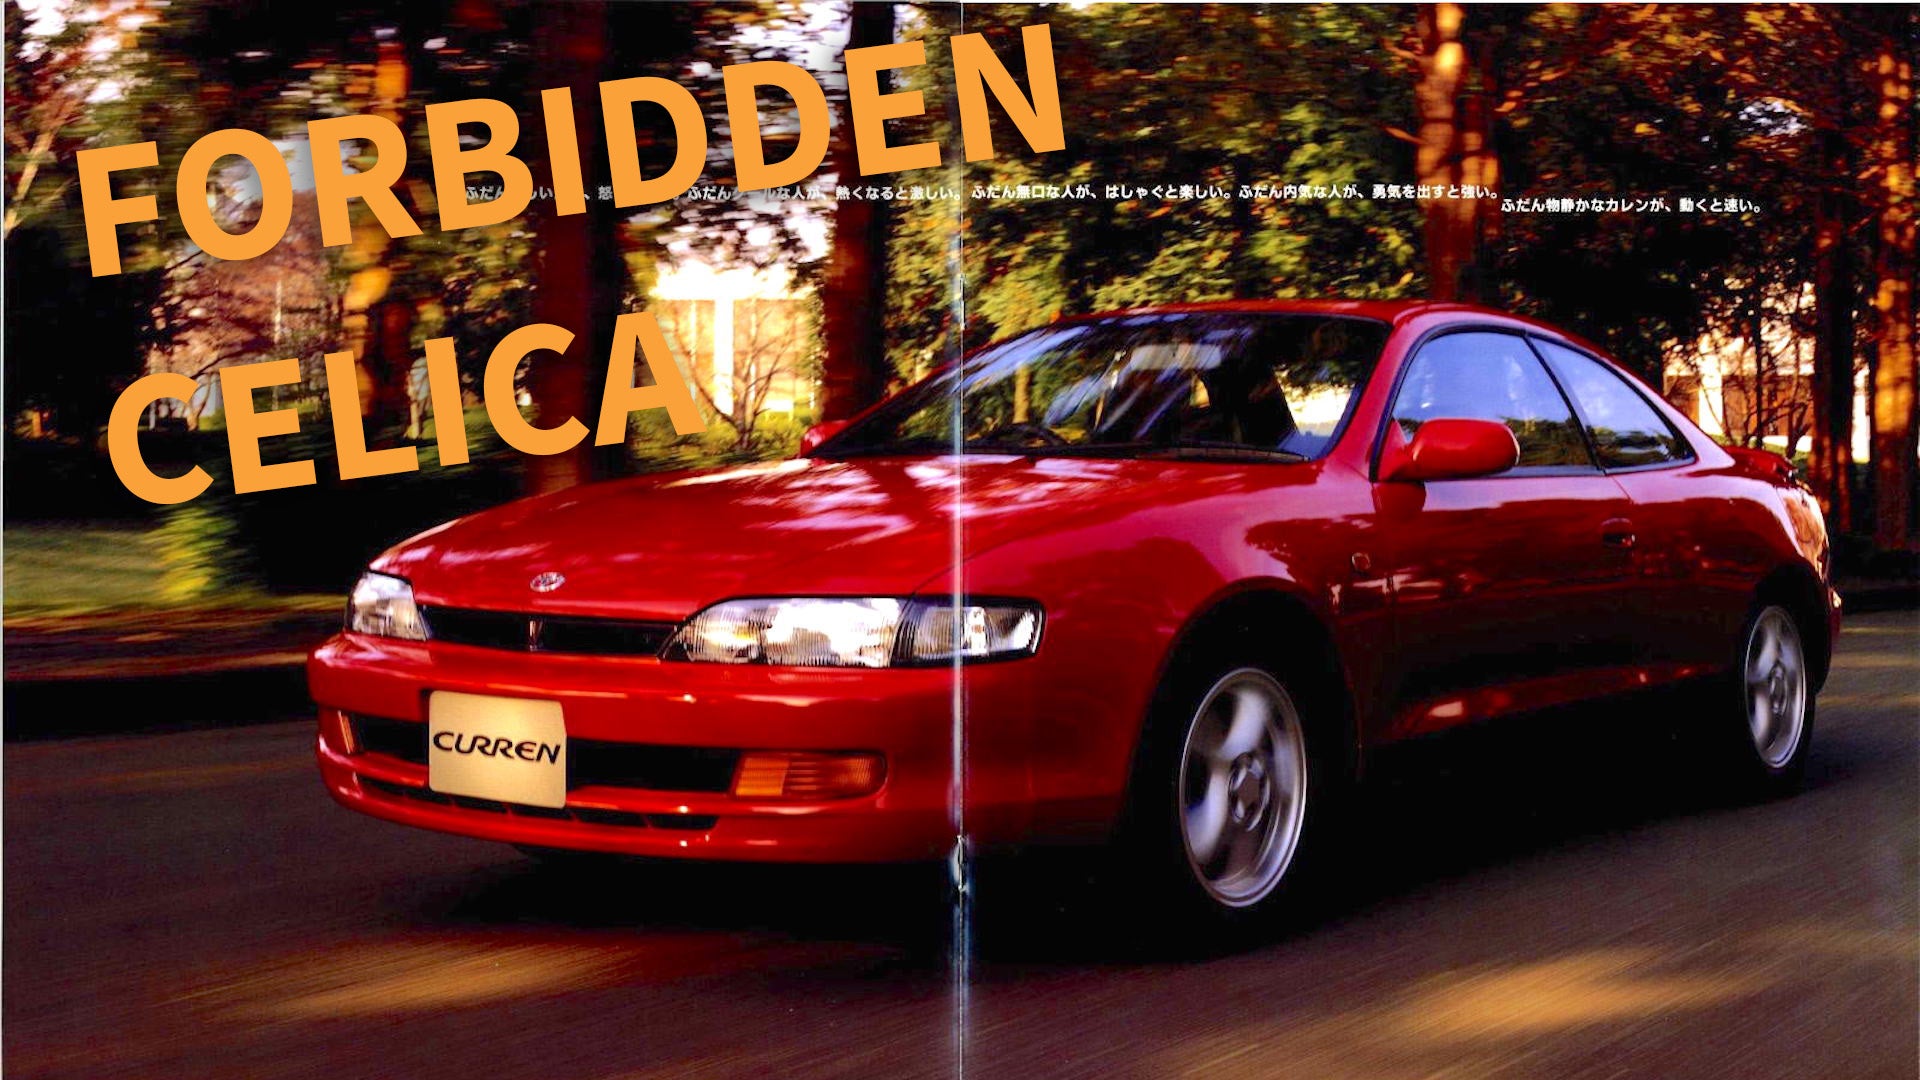 The Toyota Curren was a JDM cousin of the Celica, equipped with four-wheel steering and a TV.